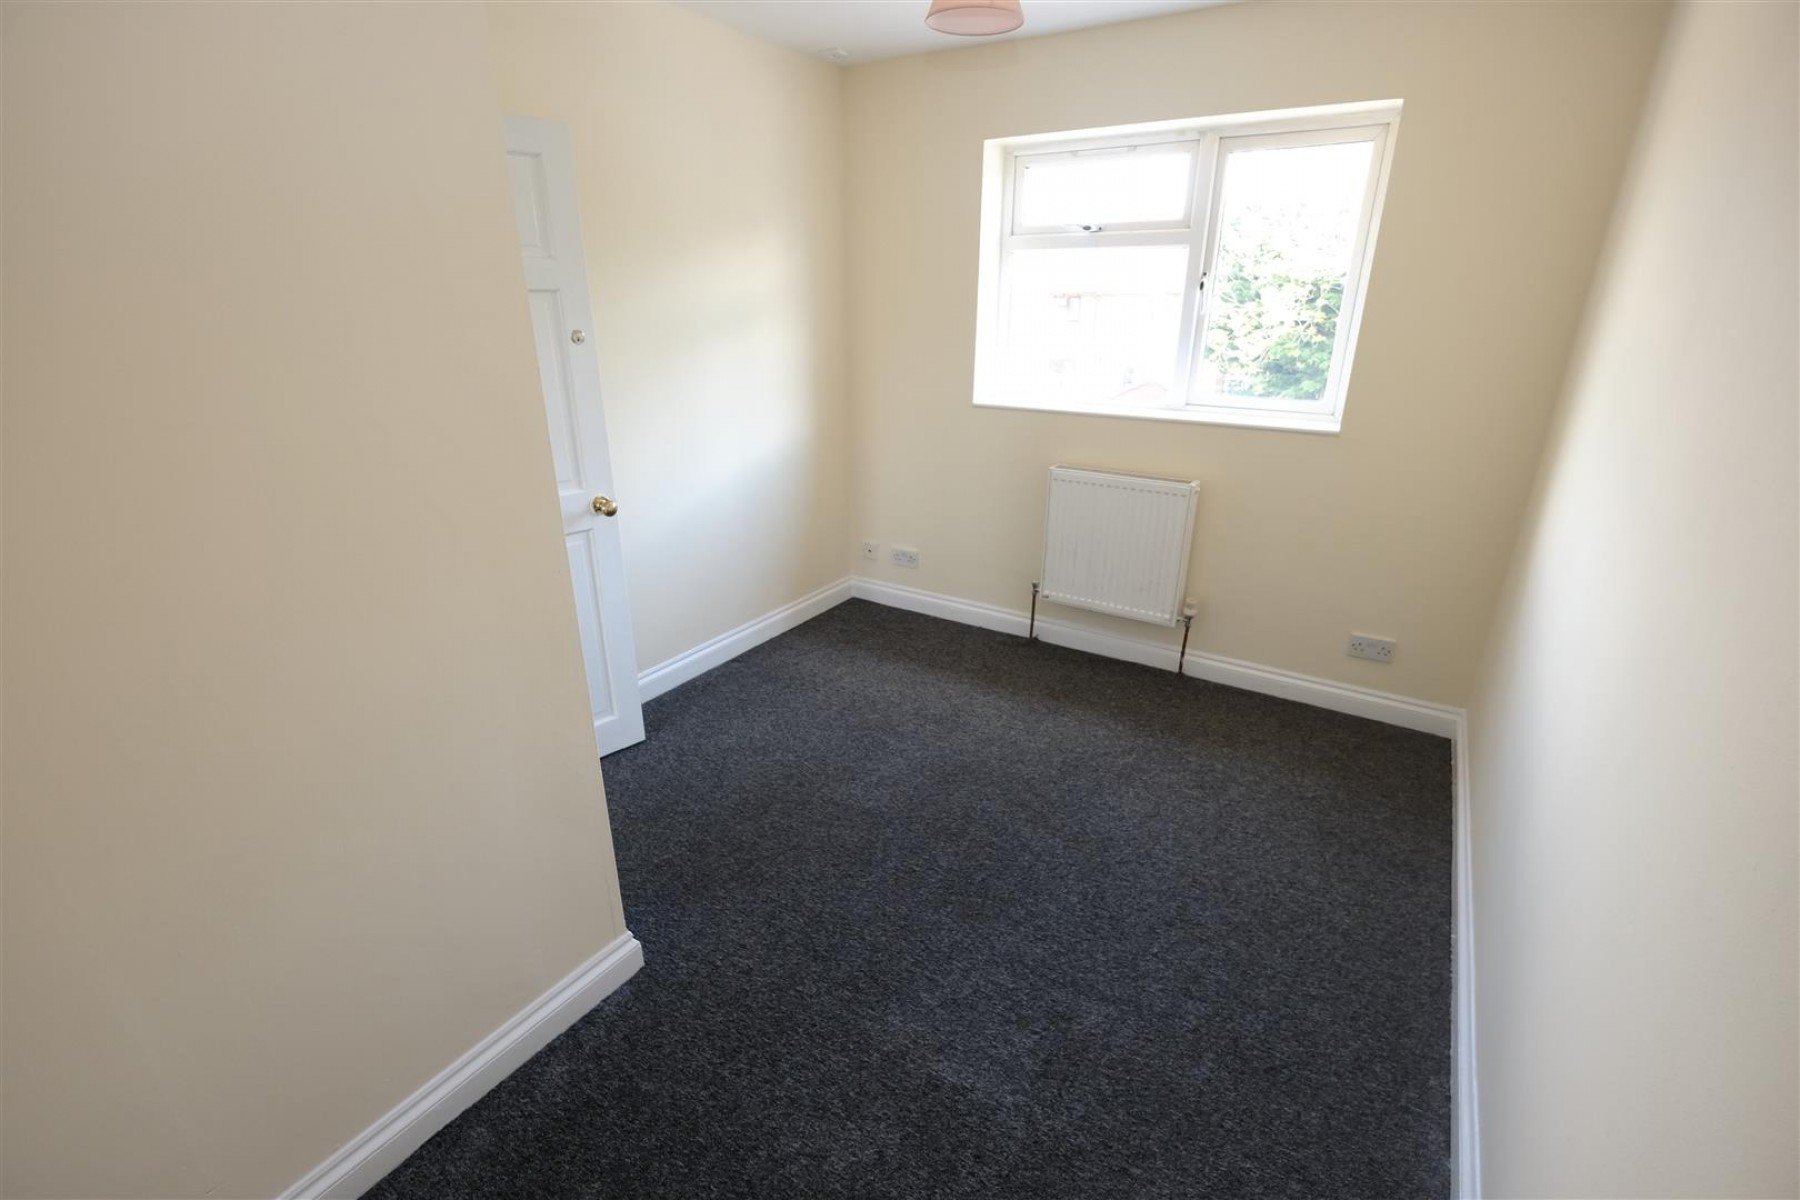 Images for HMO / FAMILY HOME - FRENCHAY